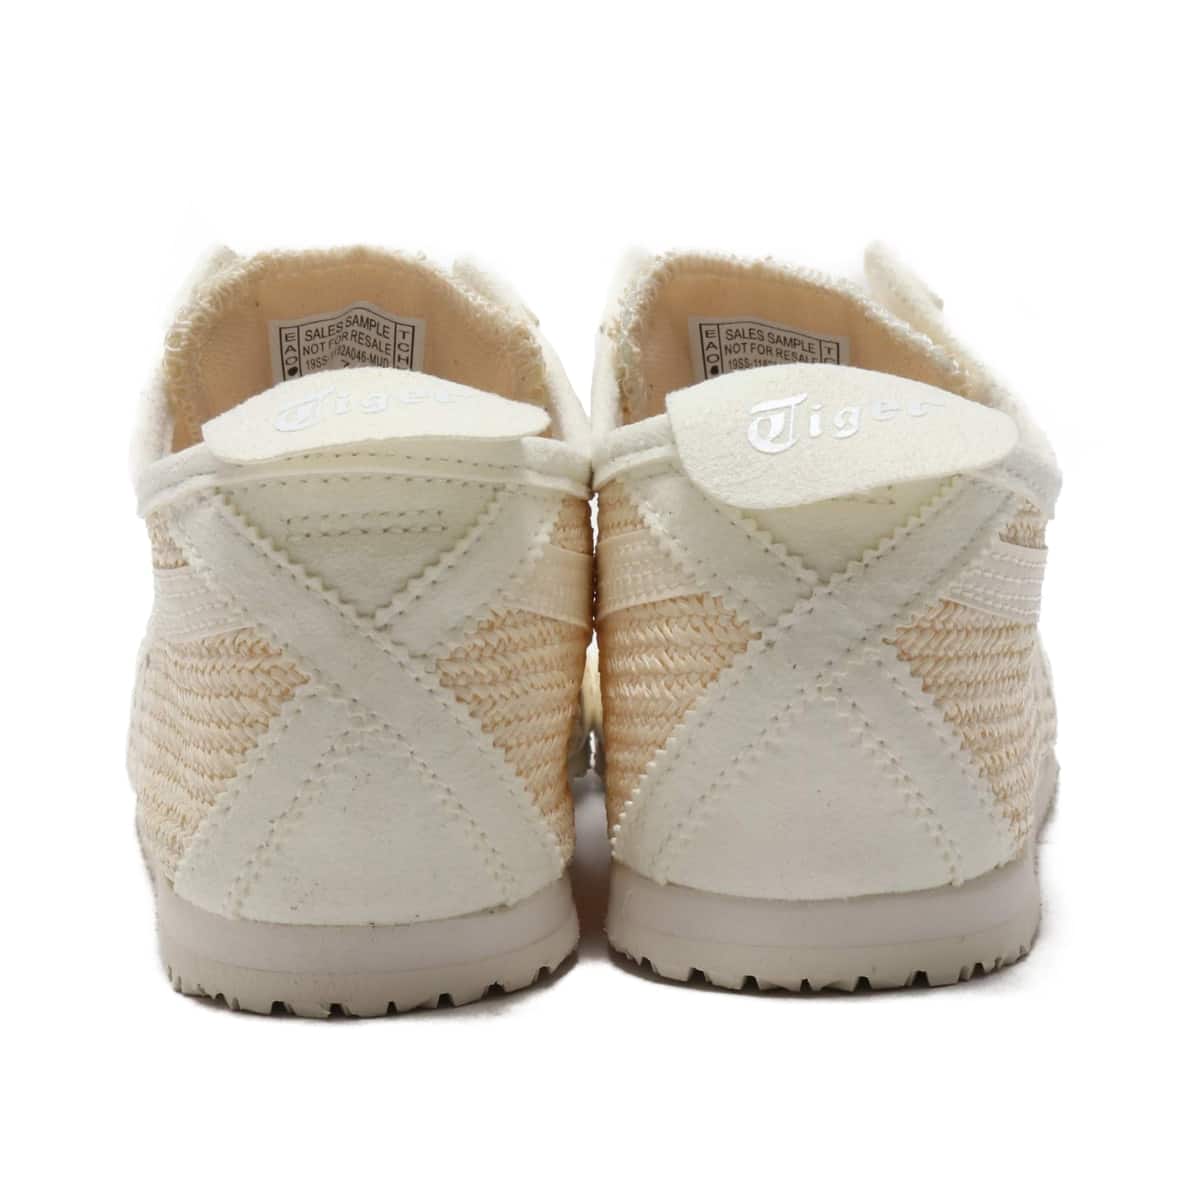 Cream Women Shoes Sneakers 1182A046-101 